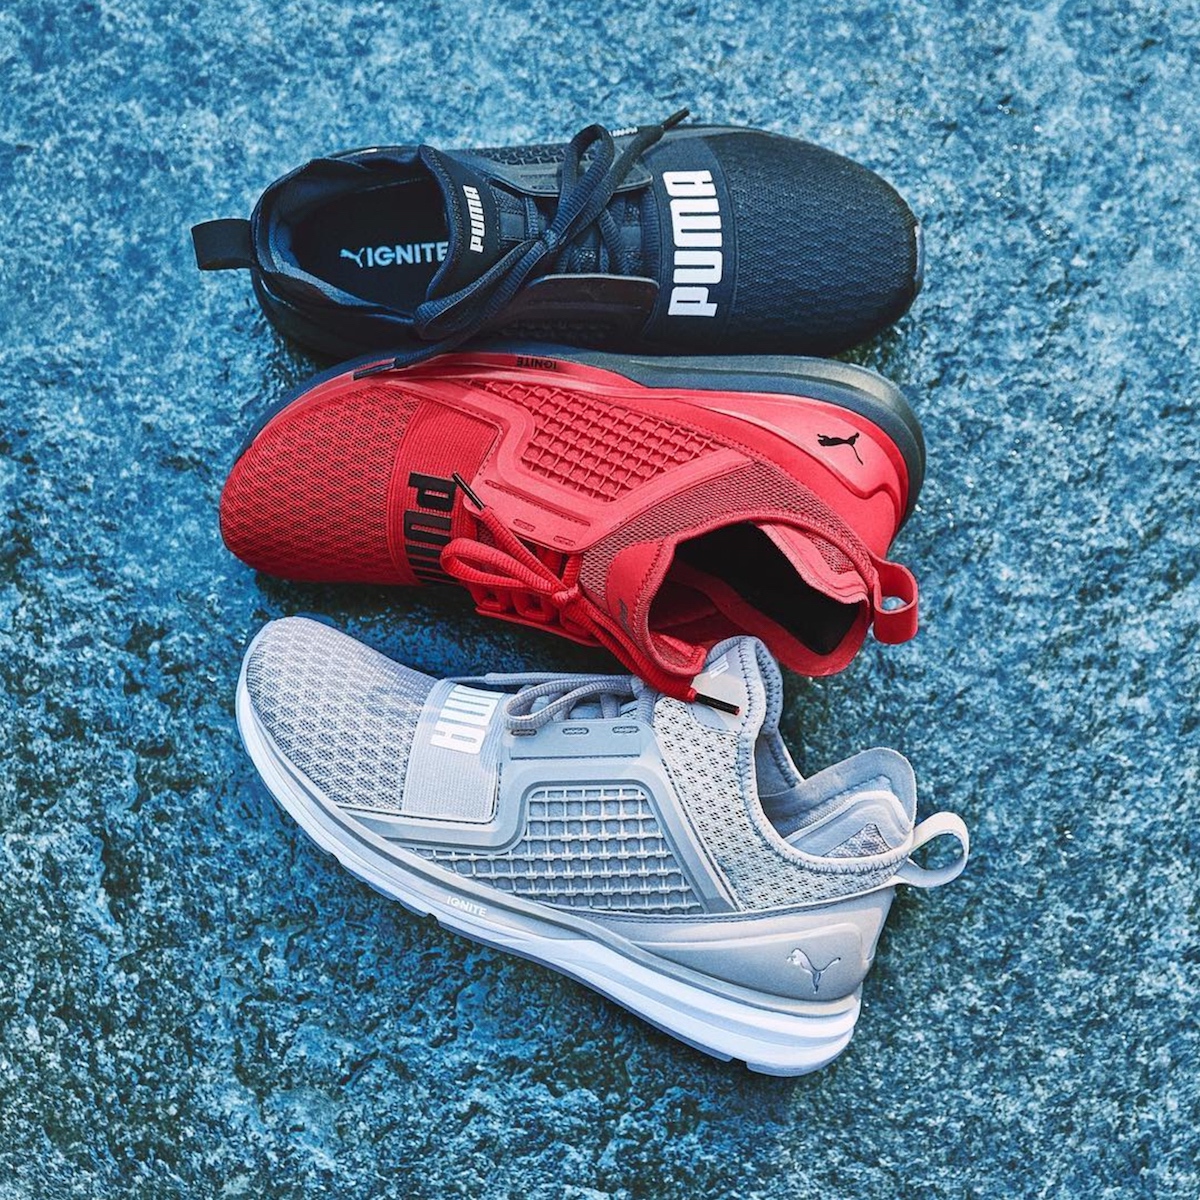 Colorways of the Puma Ignite Limitless 